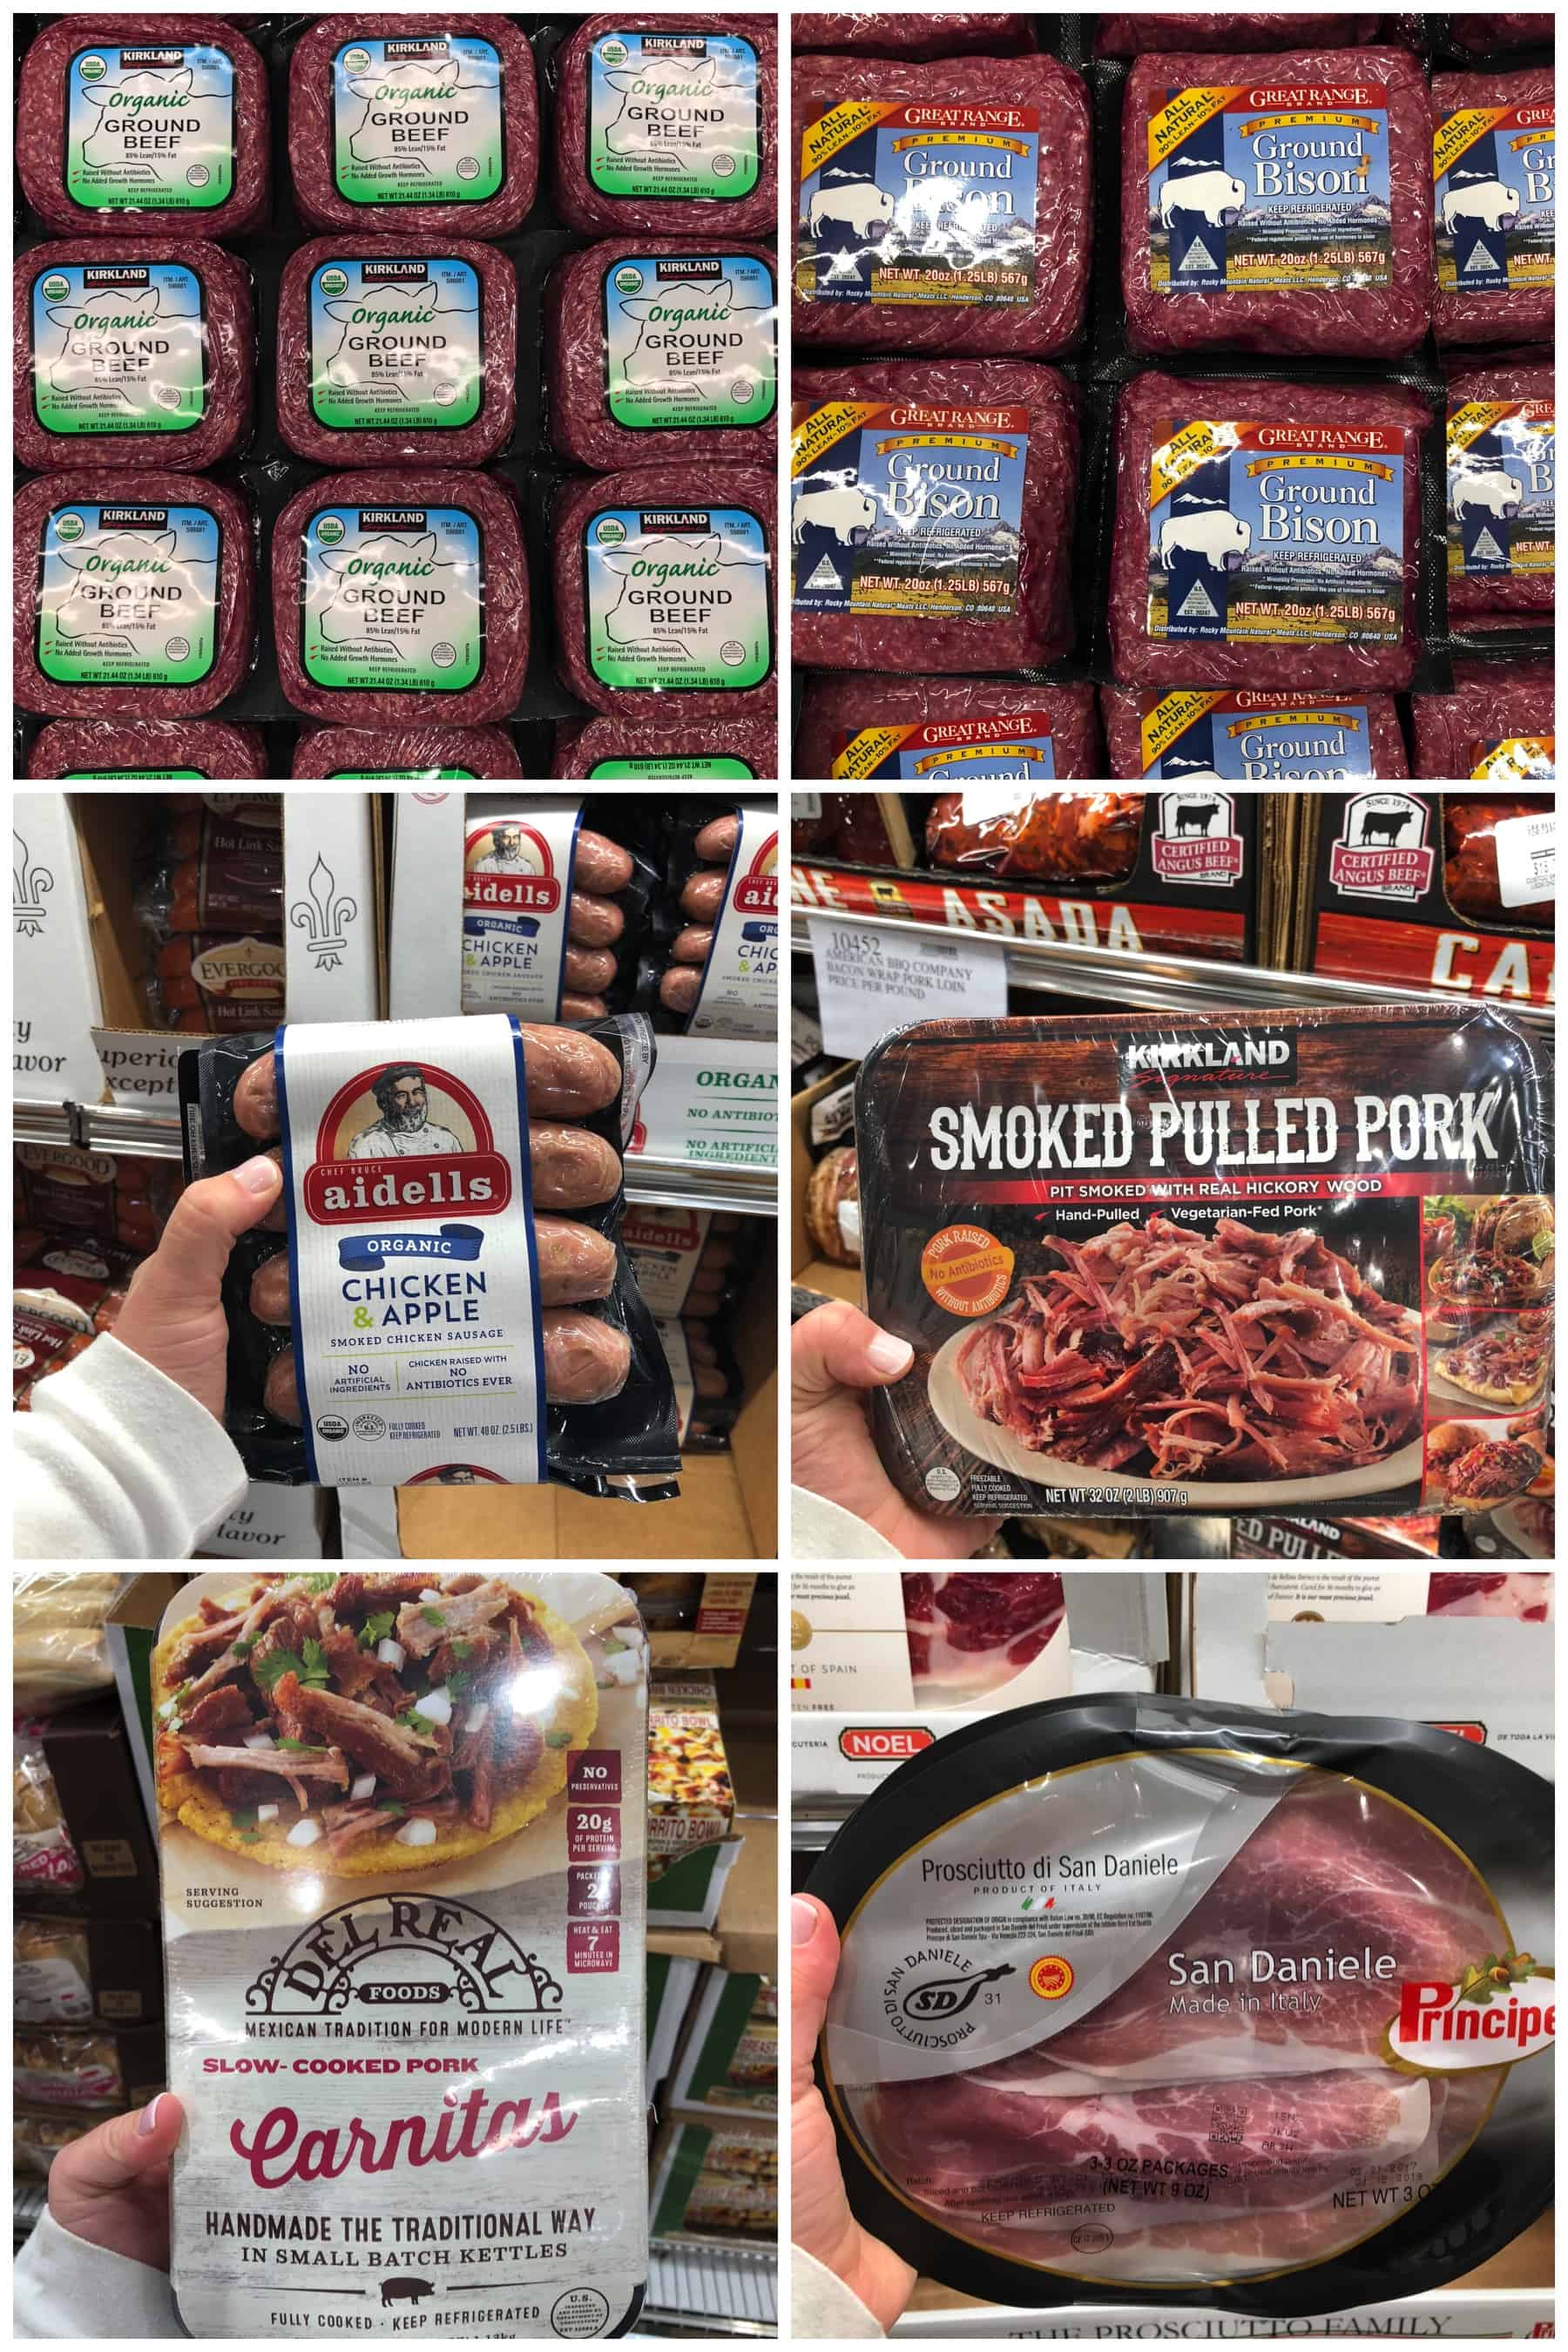 organic ready made and raw meats for shopping list for Whole30 at Costco